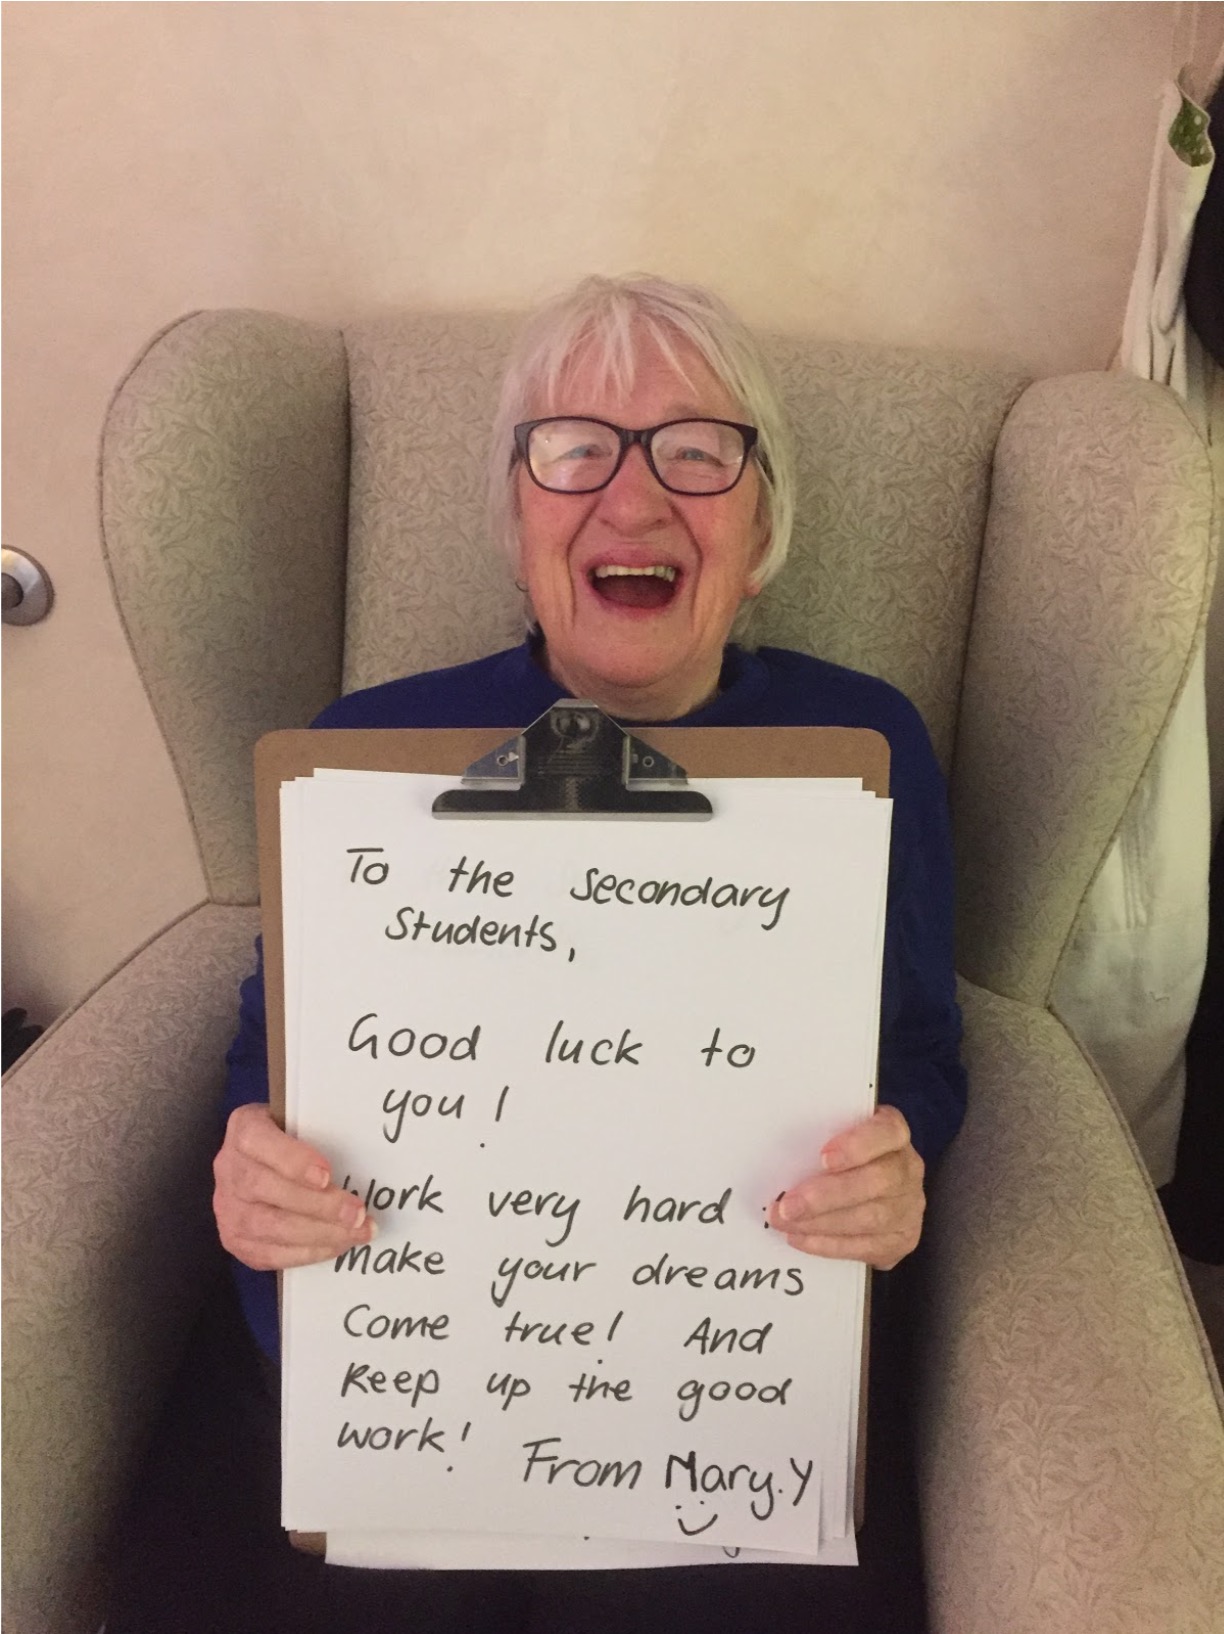 Mary, a resident is sitting in an armchair laughing at the camera. She is holding a large clipboard with a hand written message attached. The message reads: "To the Secondary Students, Good luck to you! Work very hard and make your dreams come true! And keep up the good work! From Mary Y"